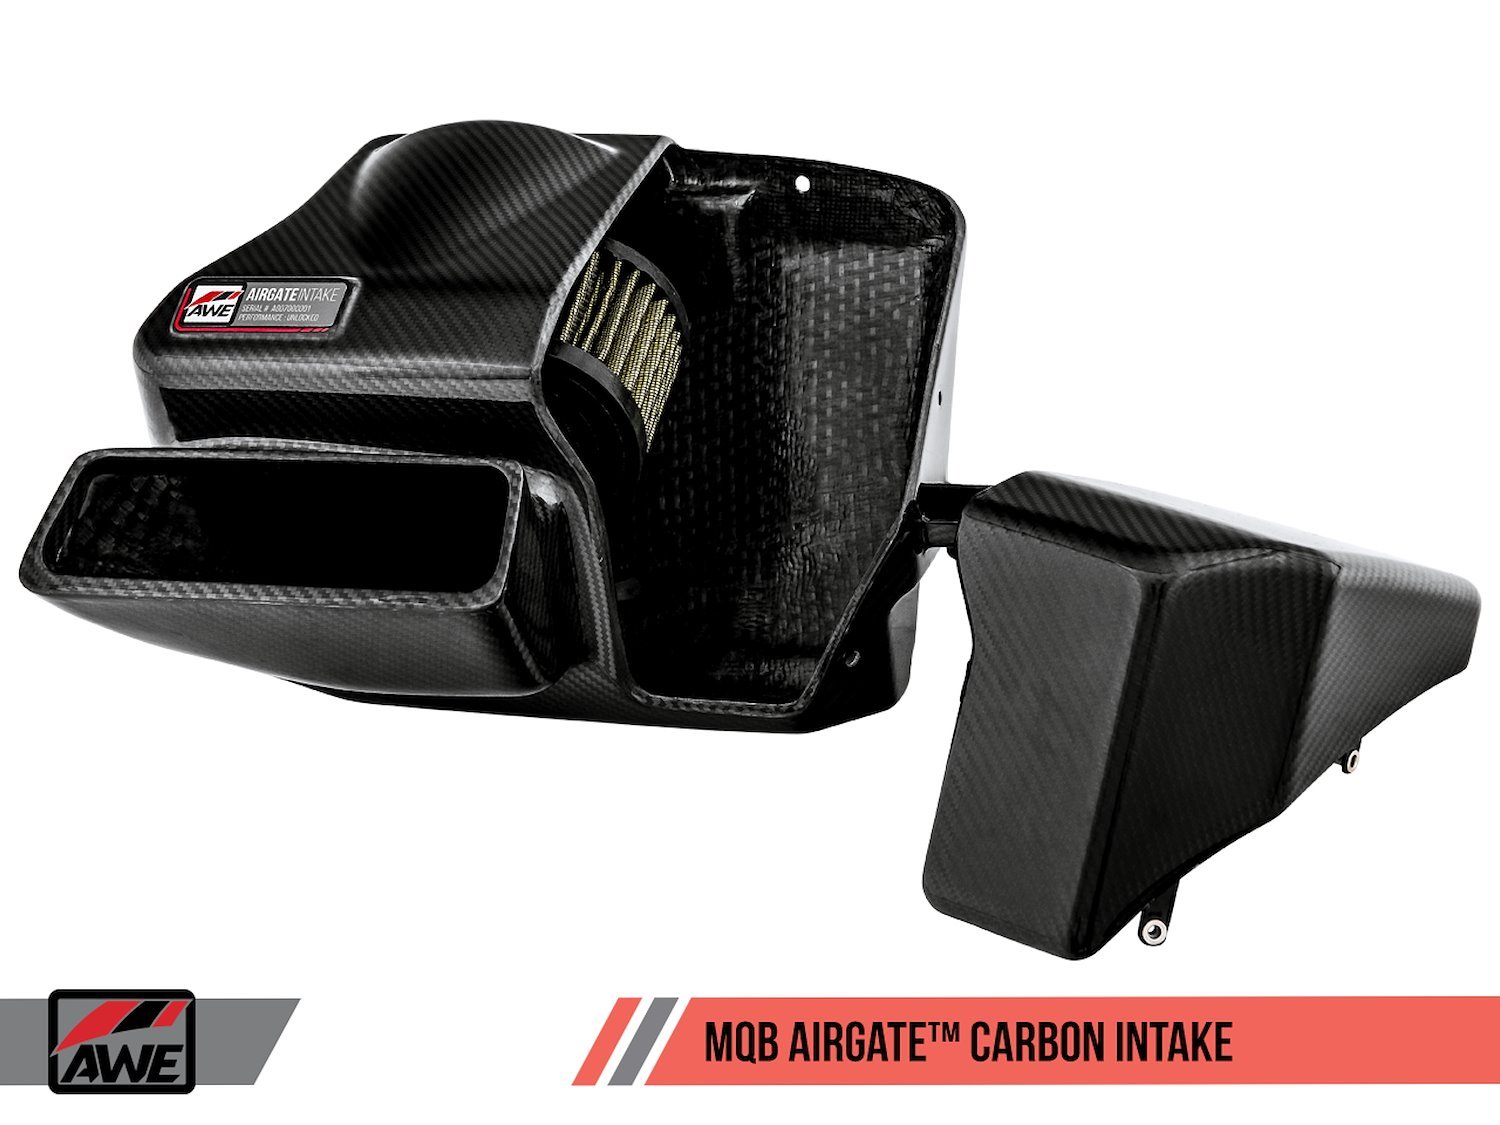 AirGate Carbon Intake for Audi / VW MQB (1.8T / 2.0T) - Without Lid